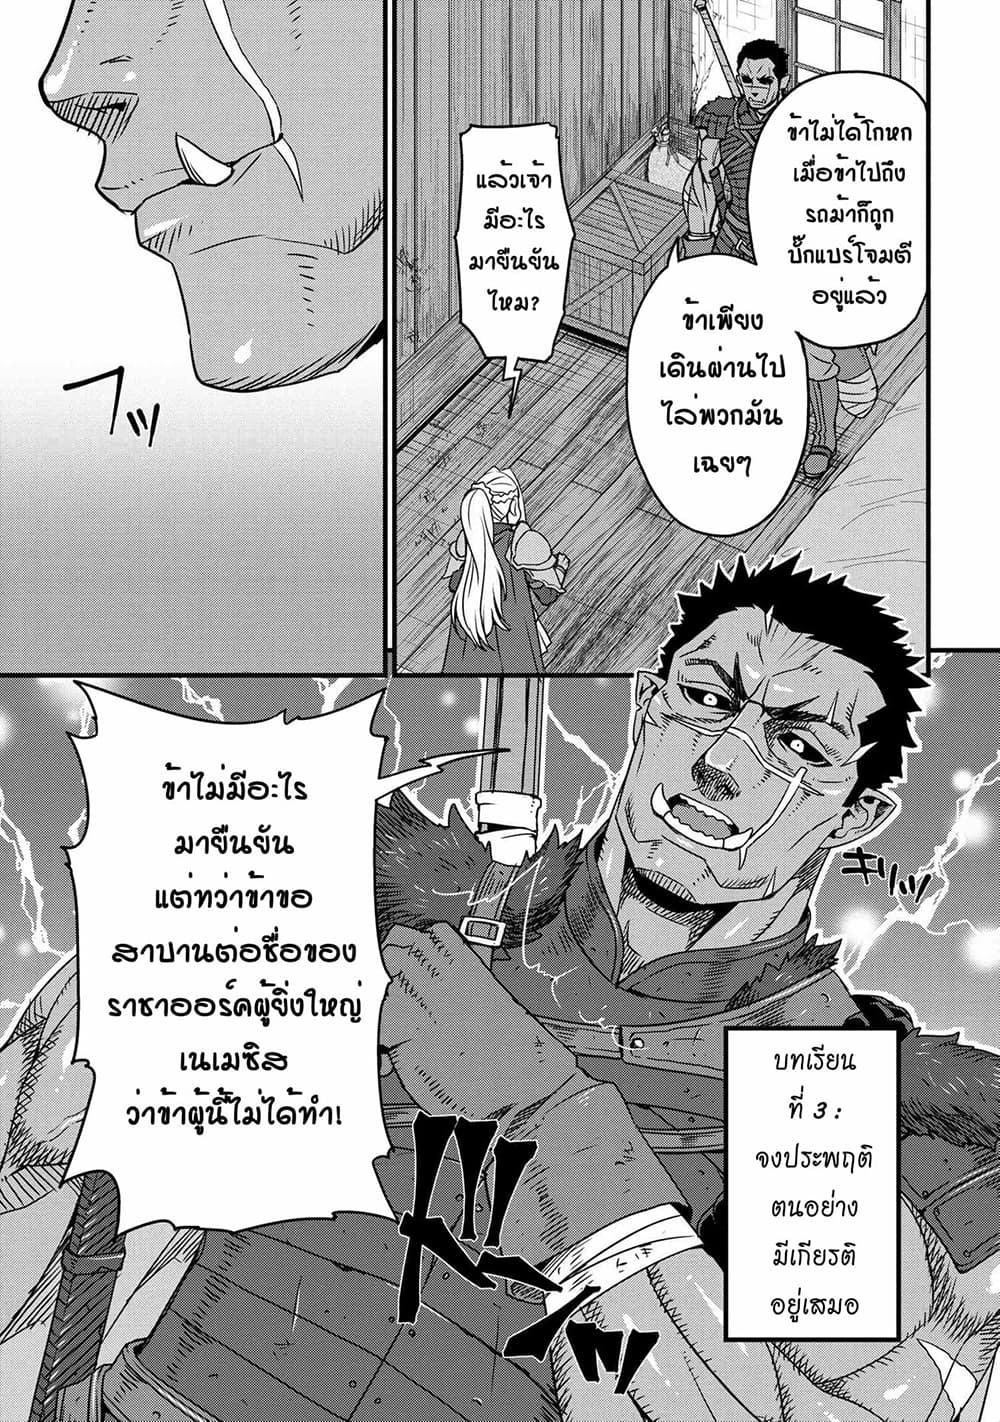 Orc Hero Story – Discovery Chronicles ตอนที่ 2.1 (5)